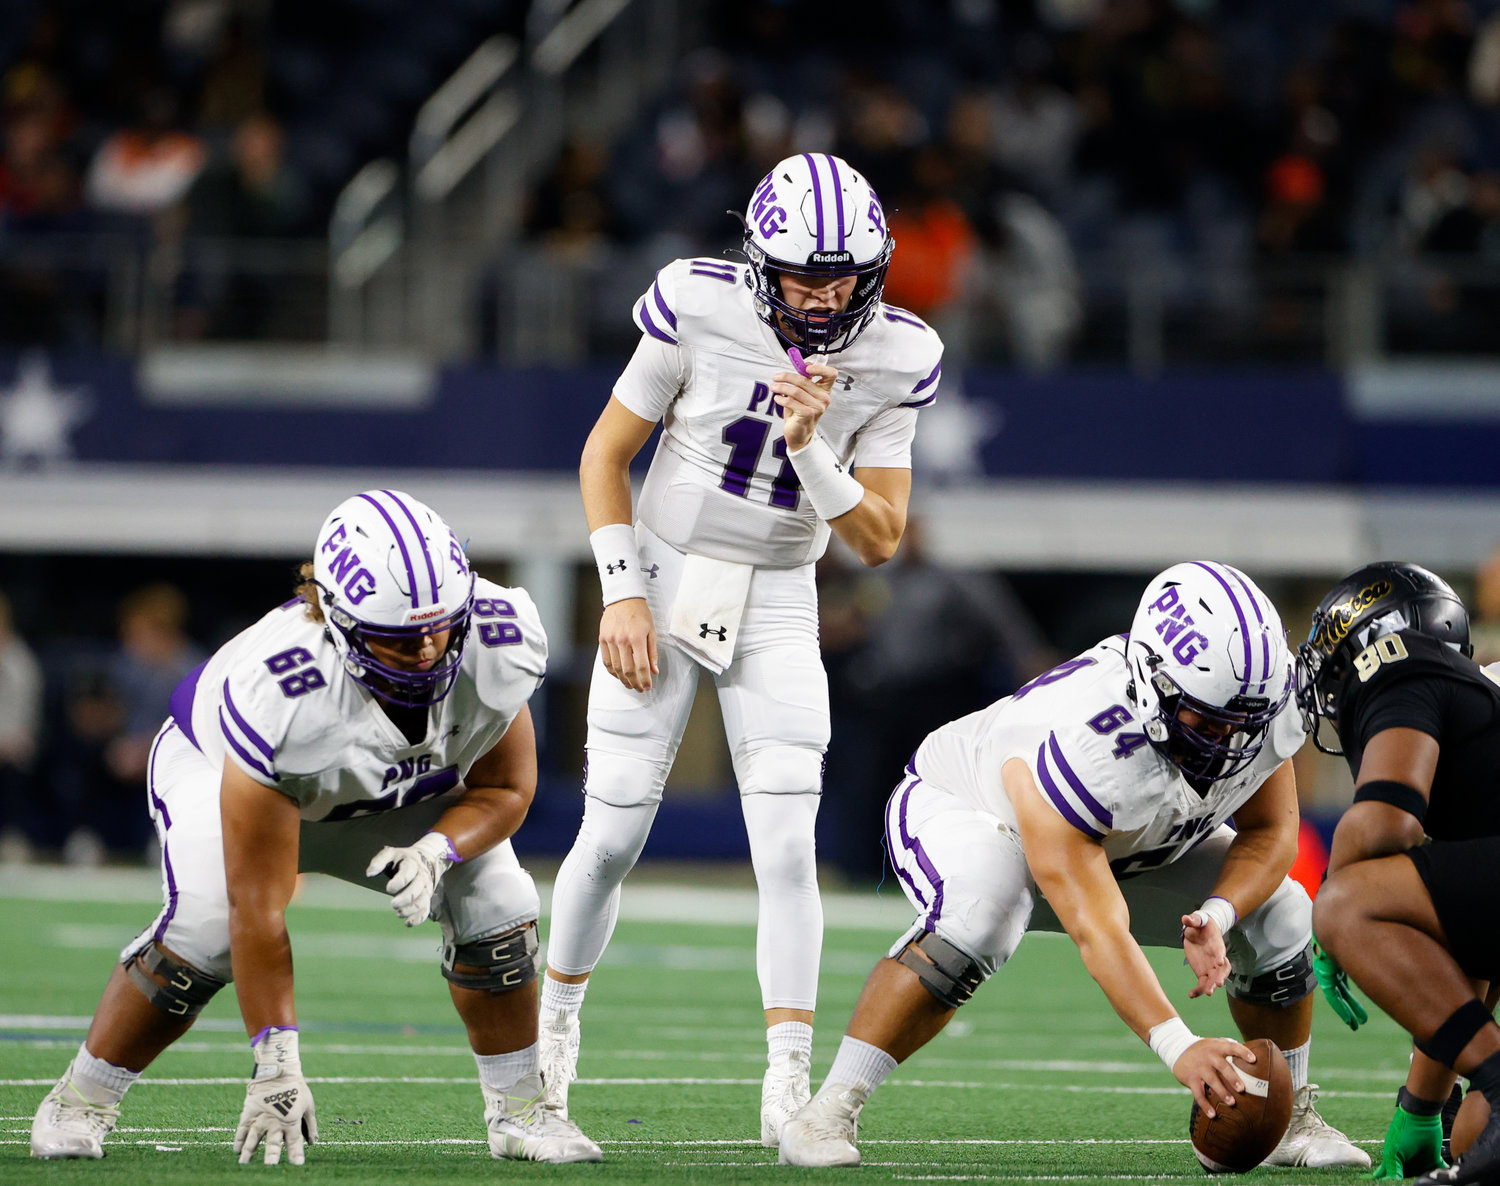 Port Neches-Groves quarterback Cole Crippen (11) prepares for a snap during the Class 5A Division II football state championship game between South Oak Cliff and Port Neches-Groves in Arlington, Texas, on Dec. 16, 2022.